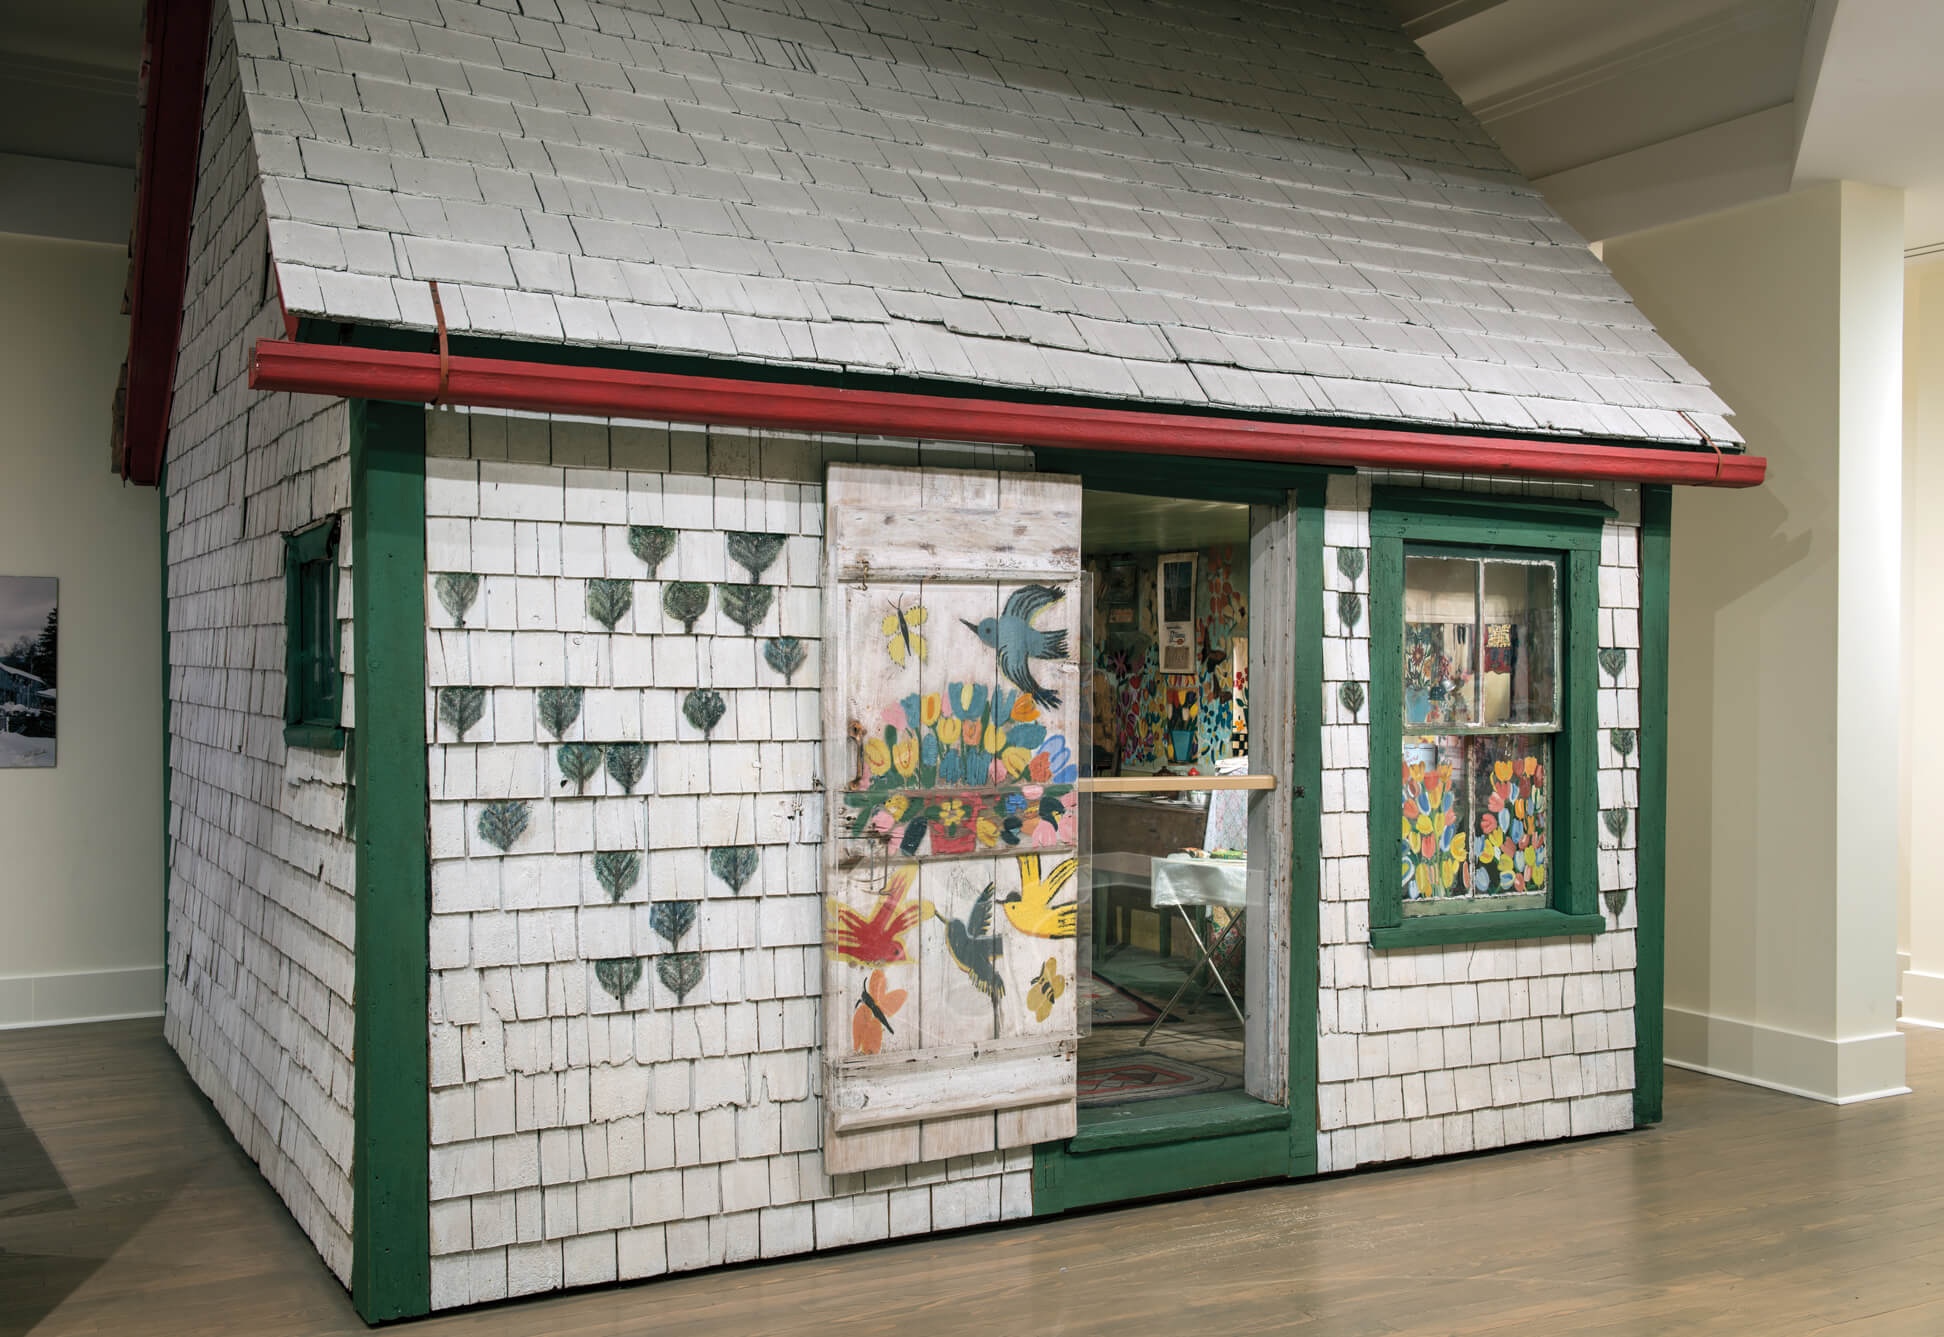 Maud Lewis’s Painted House, n.d.